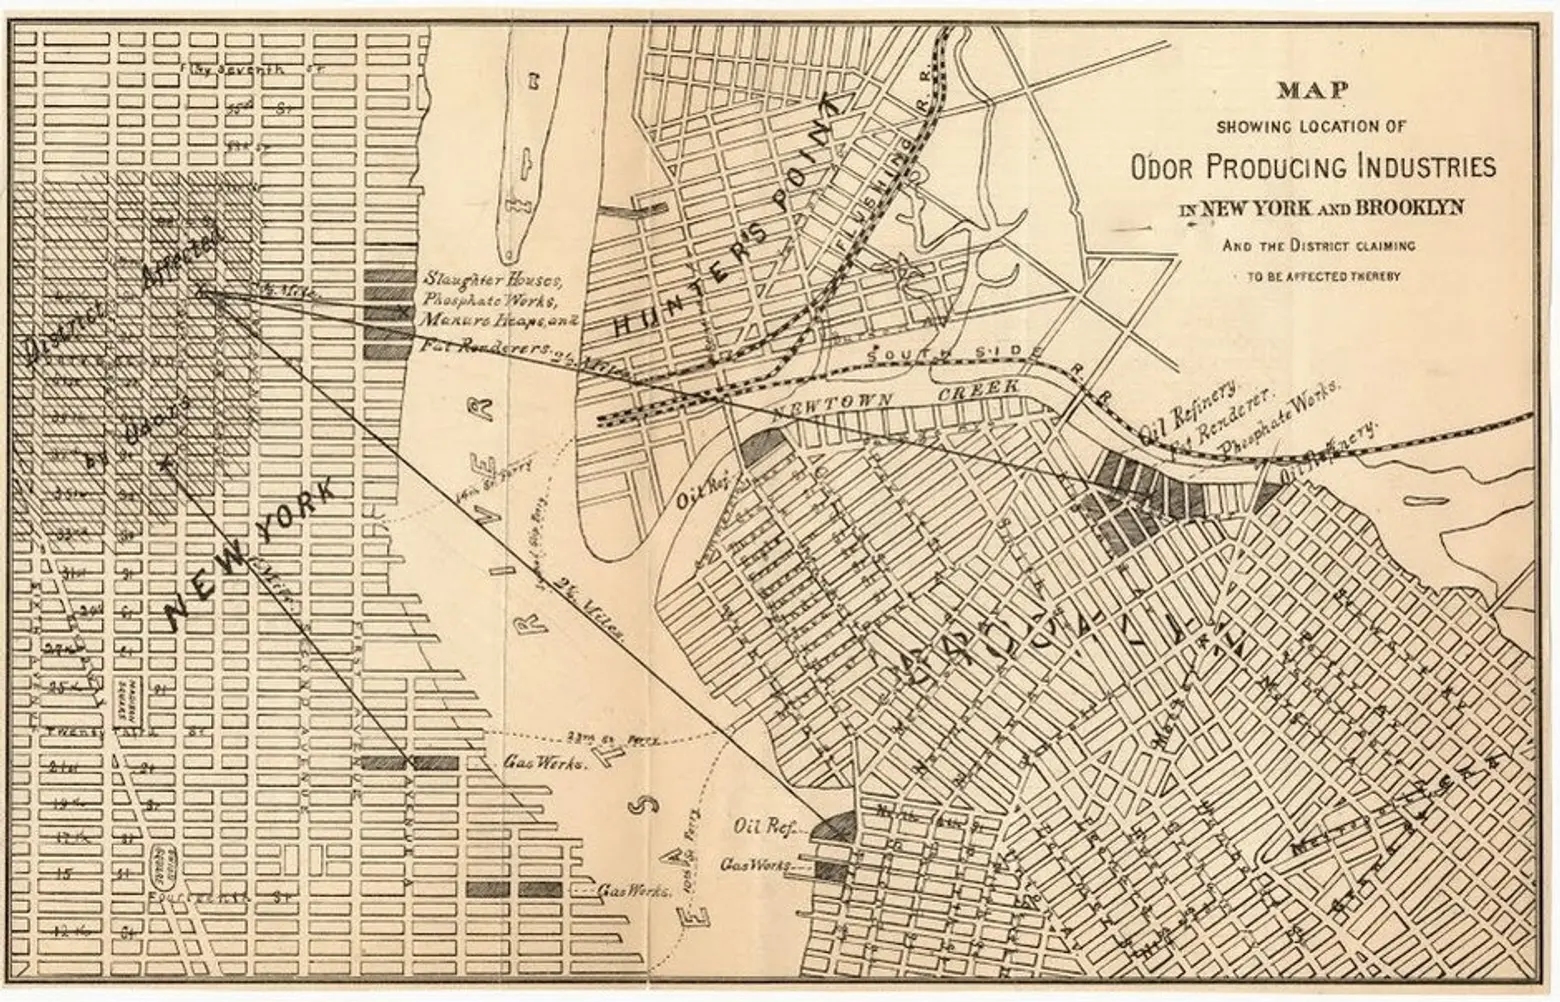 19th Century ‘Stench Map’ Explains Why Brooklyn Became the Industrial Borough